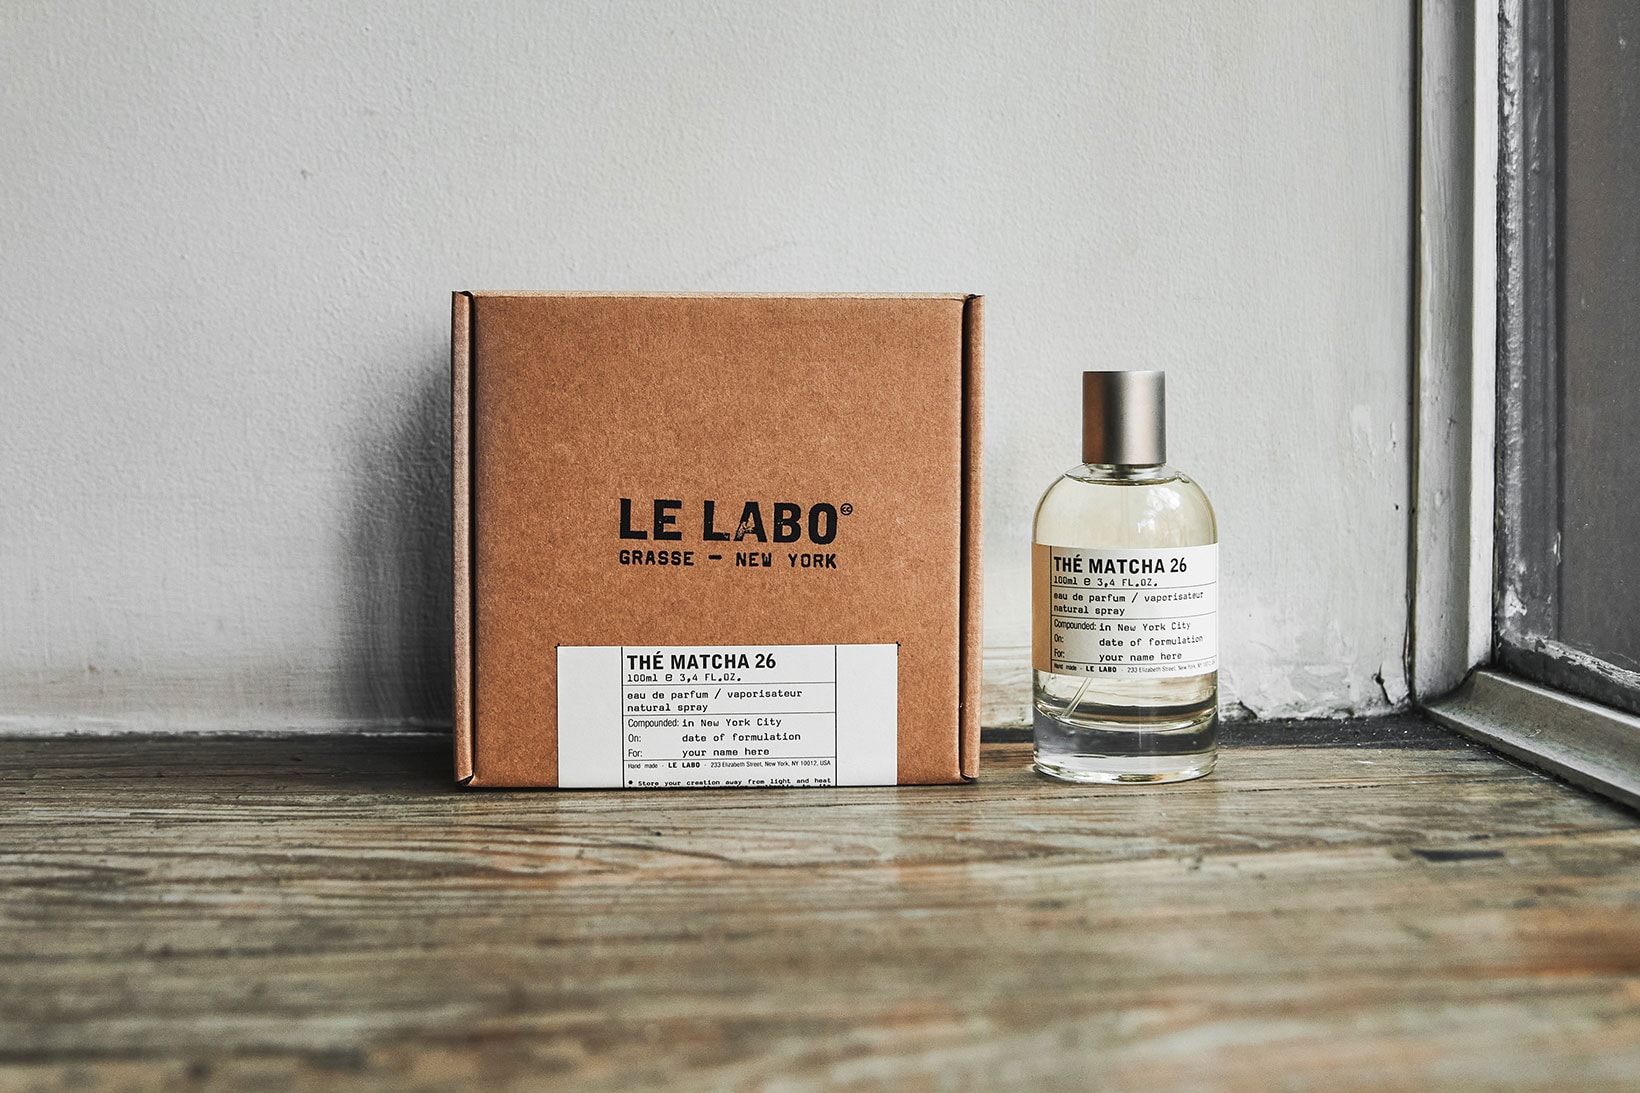 Le Labo THÉ MATCHA 26 Perfume Fragrance Scent Box Packaging Bottle